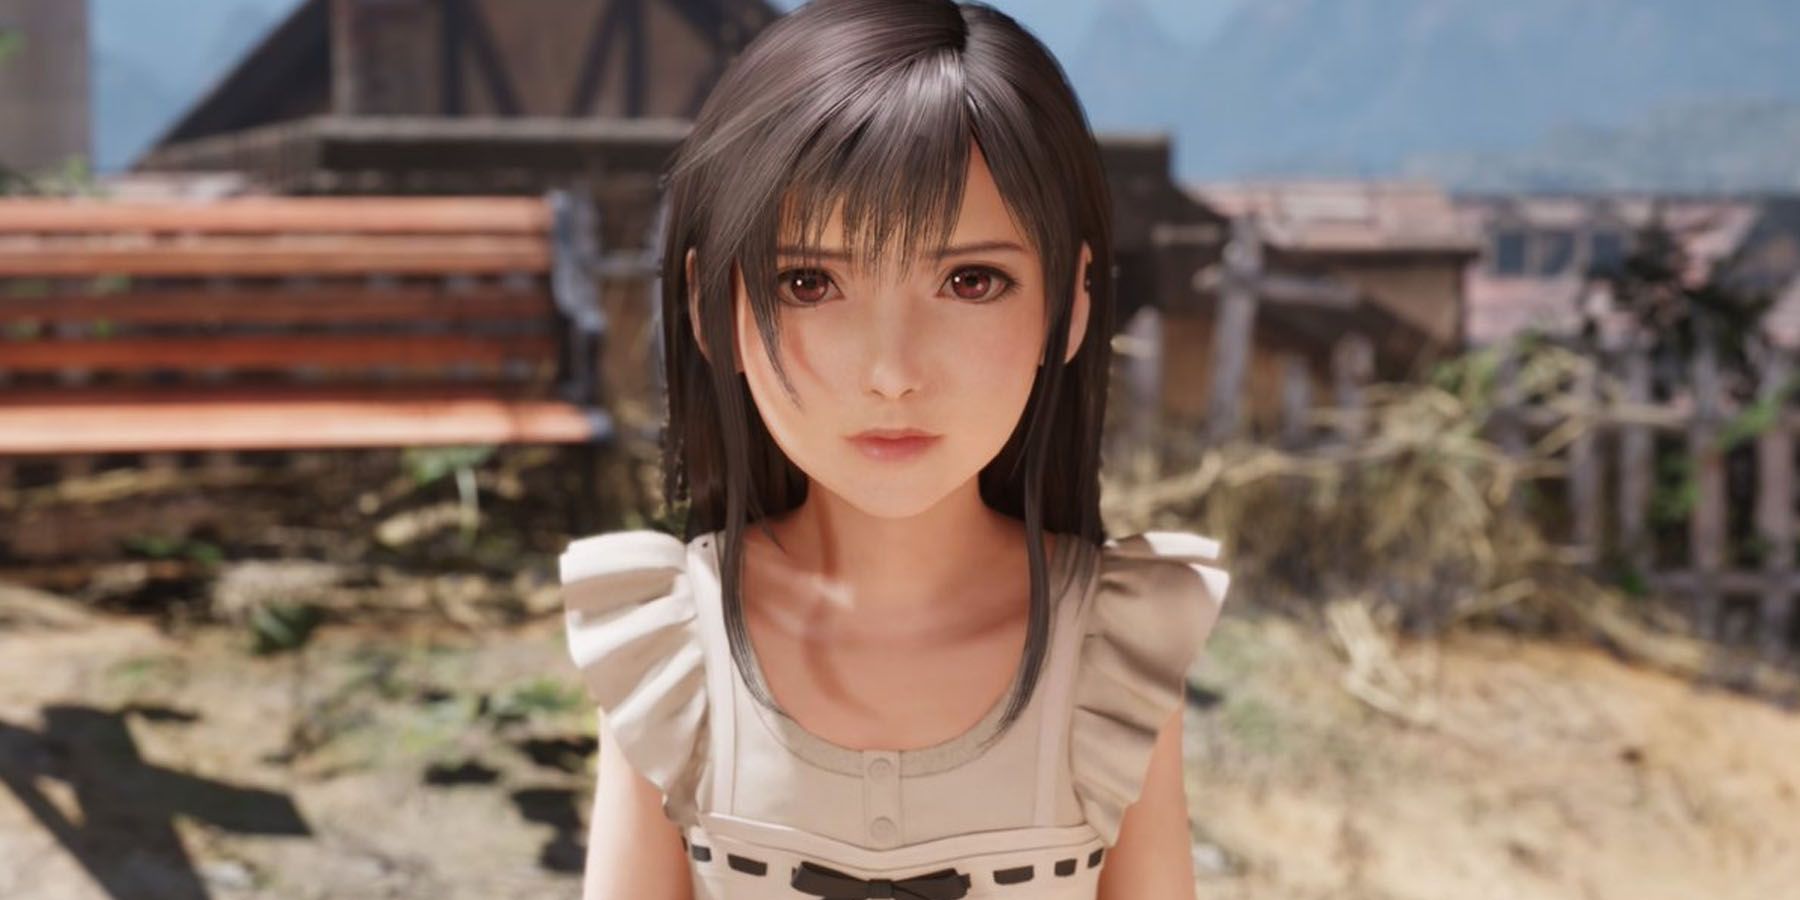 Final Fantasy 7 Remake Reveals New Details About Young Tifa